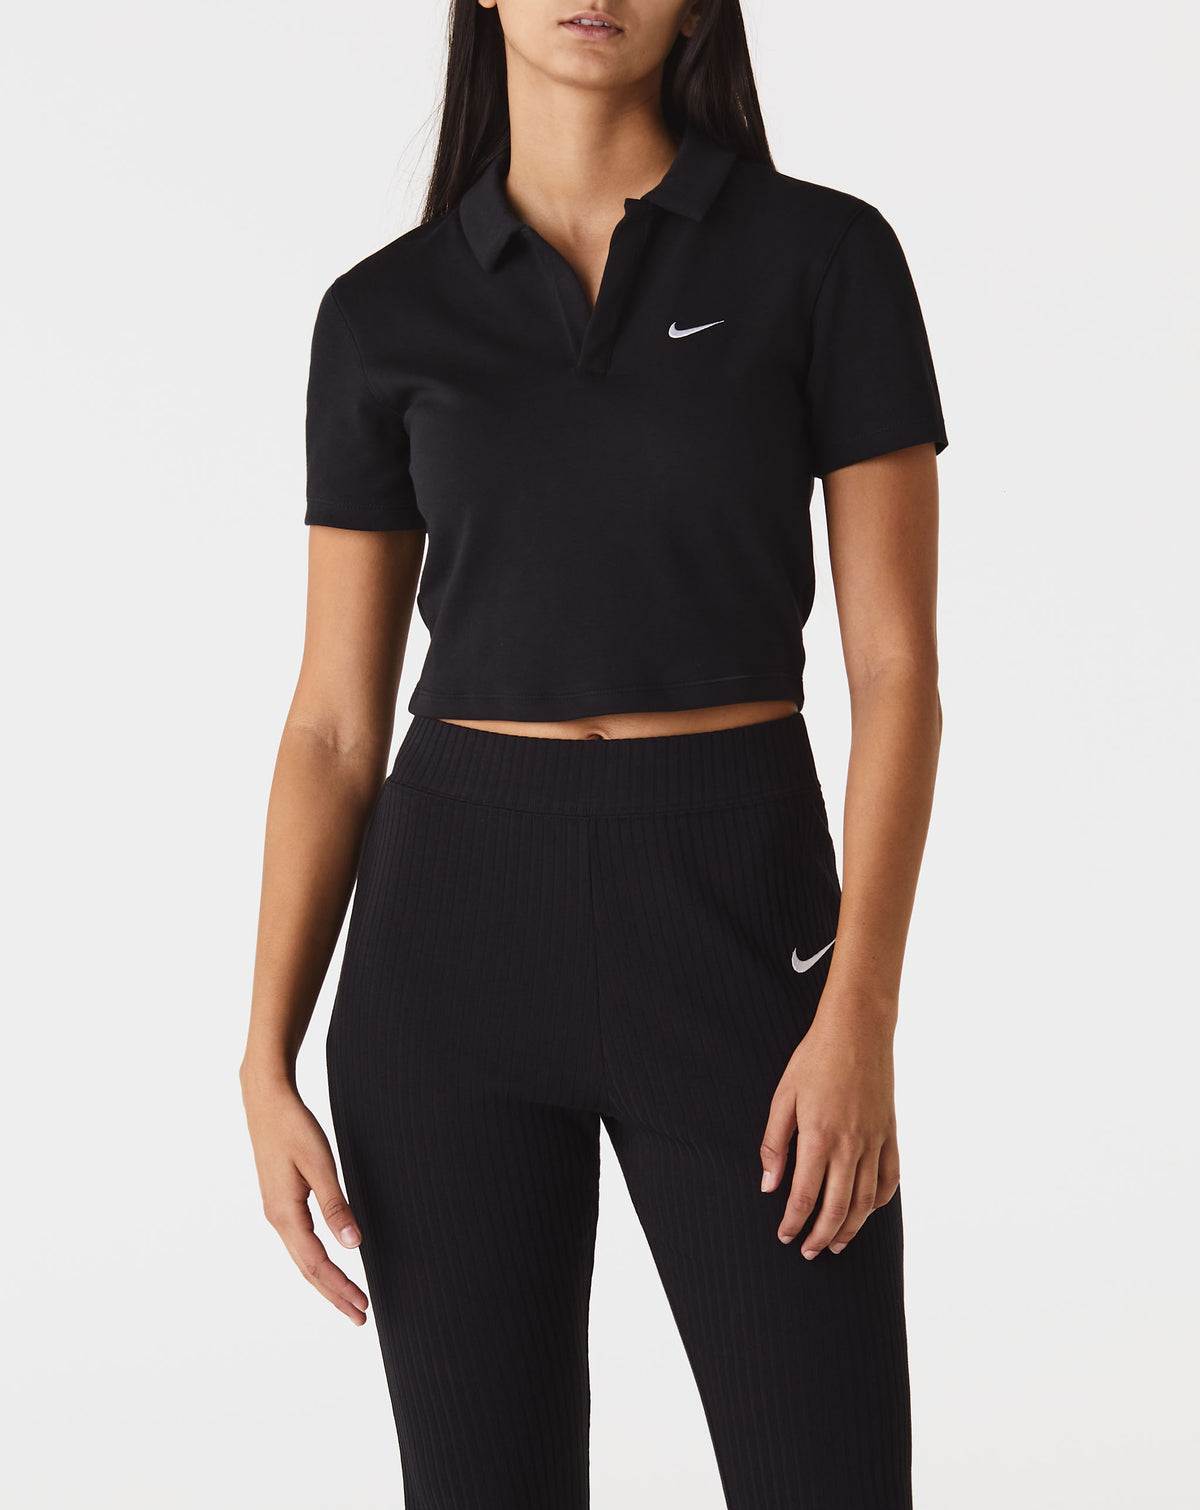 Nike Women's Essential Polo Shirt - Rule of Next Apparel